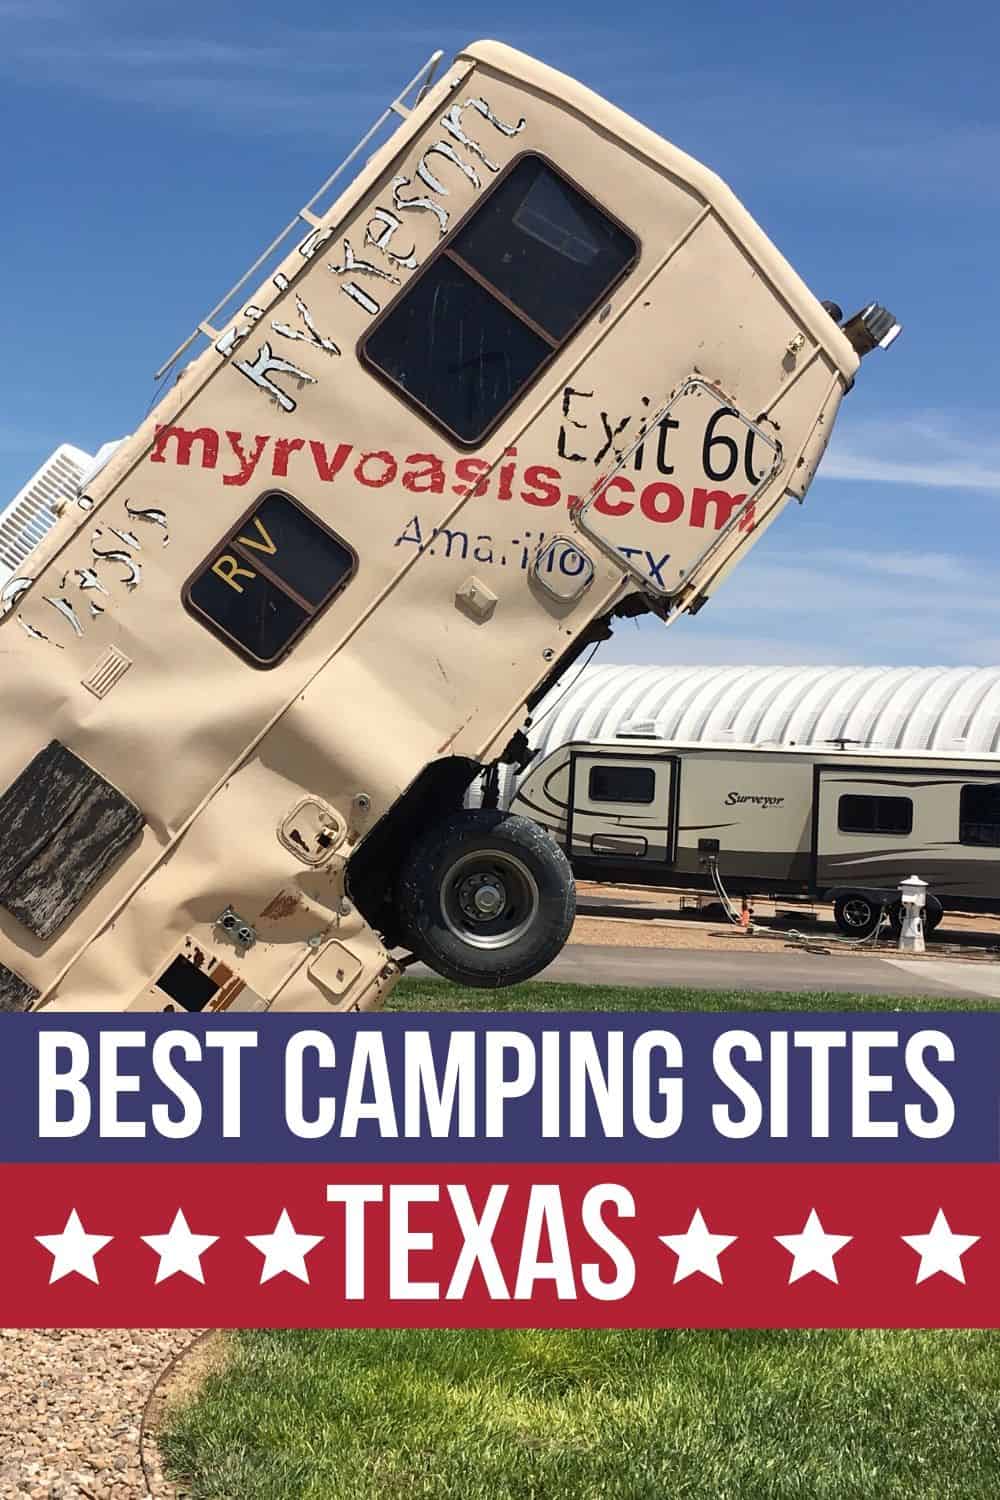 Best Camping Spots in Texas